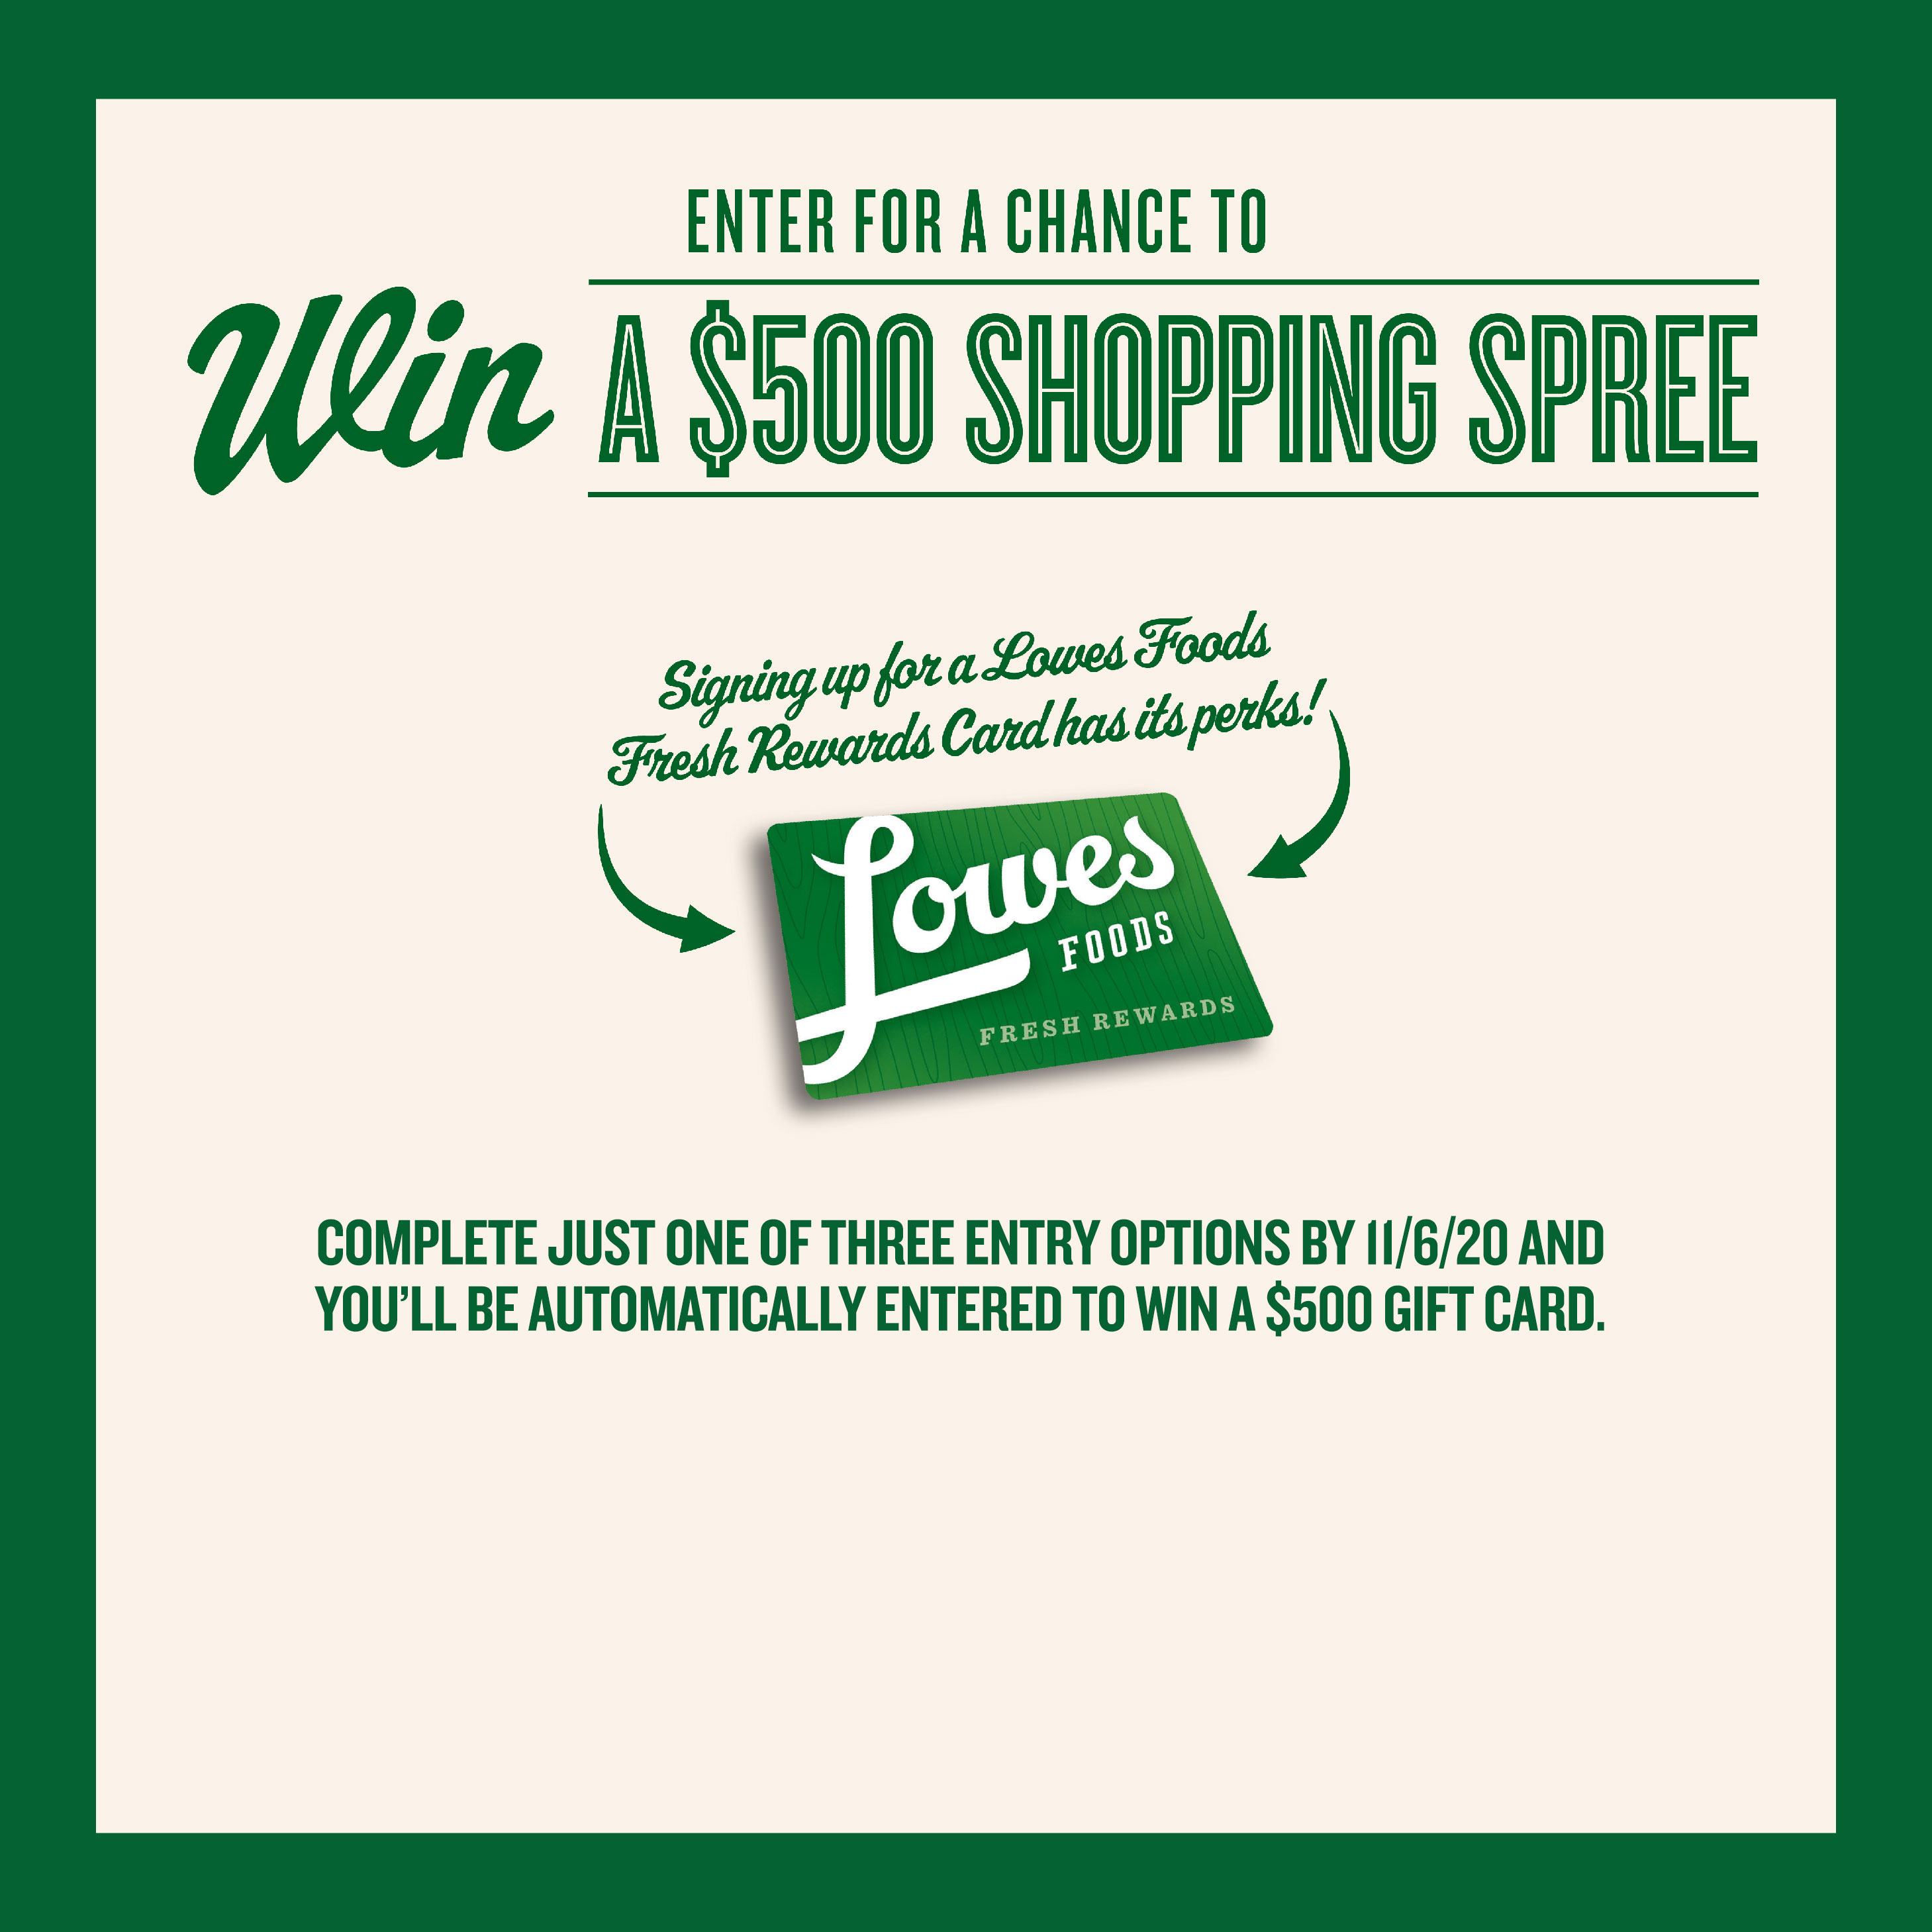 Win a $500 Shopping Spree | Lowes Foods